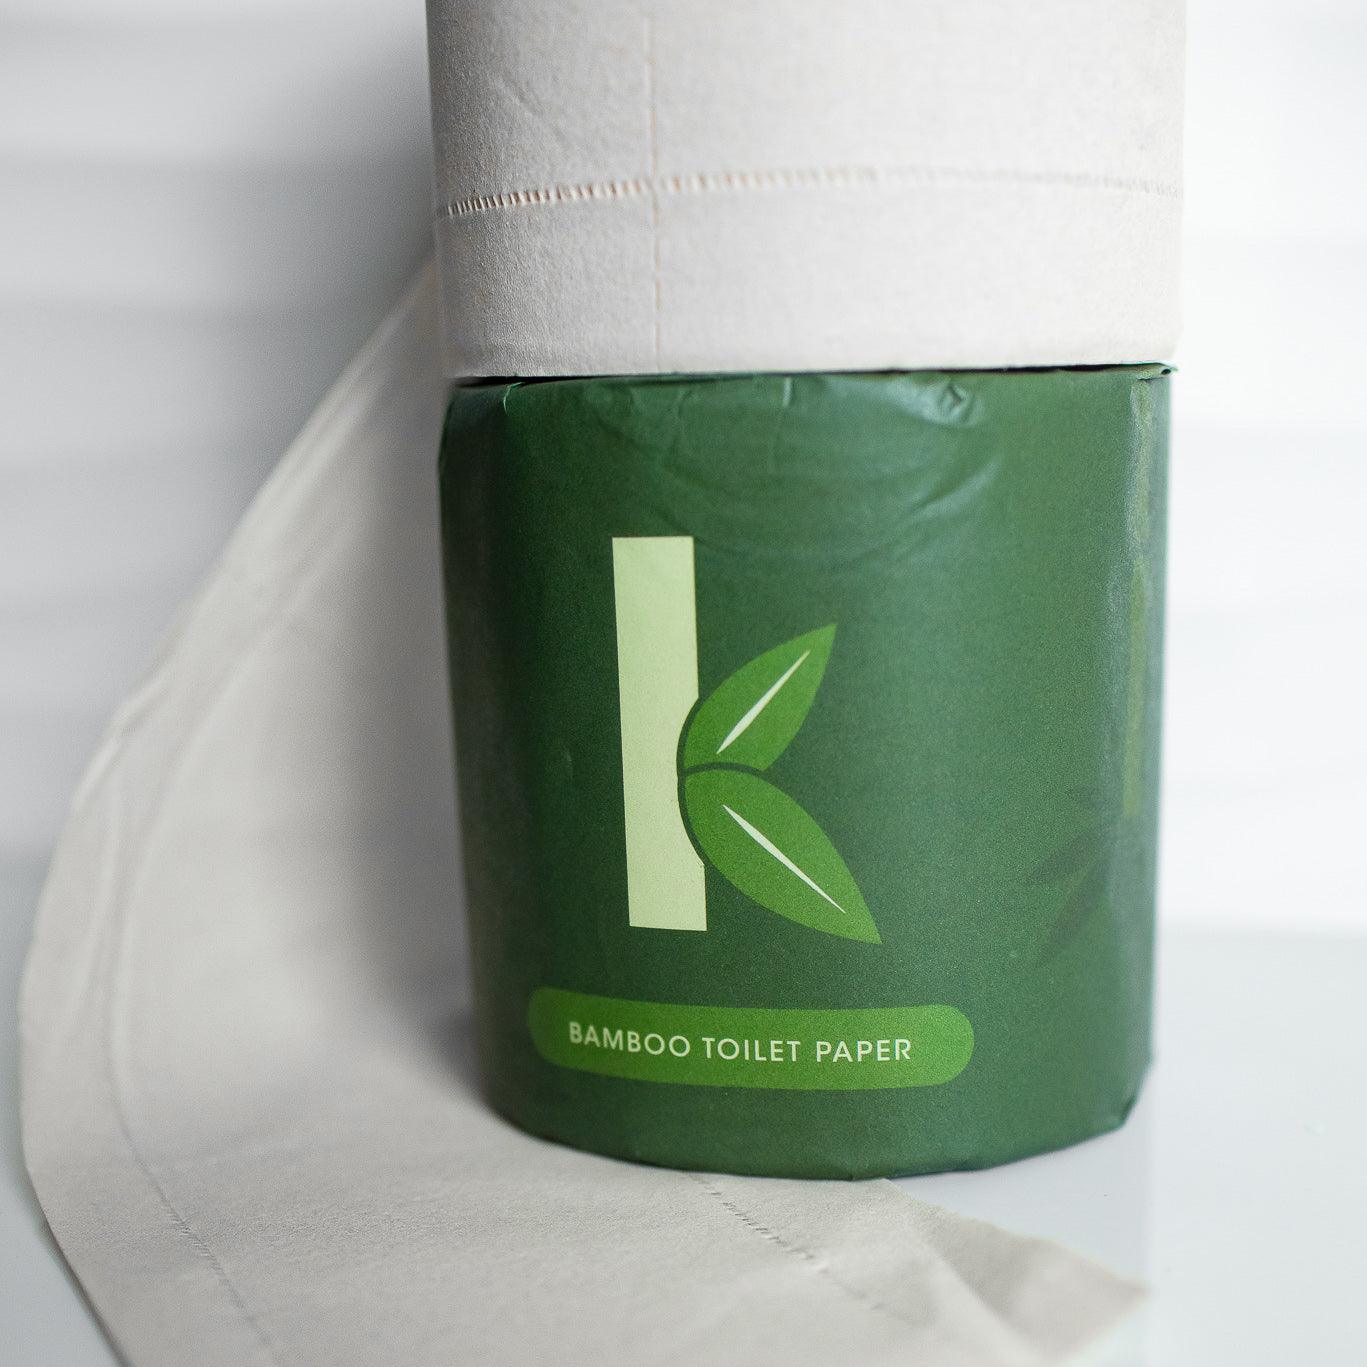 Why Use Bamboo Toilet Paper